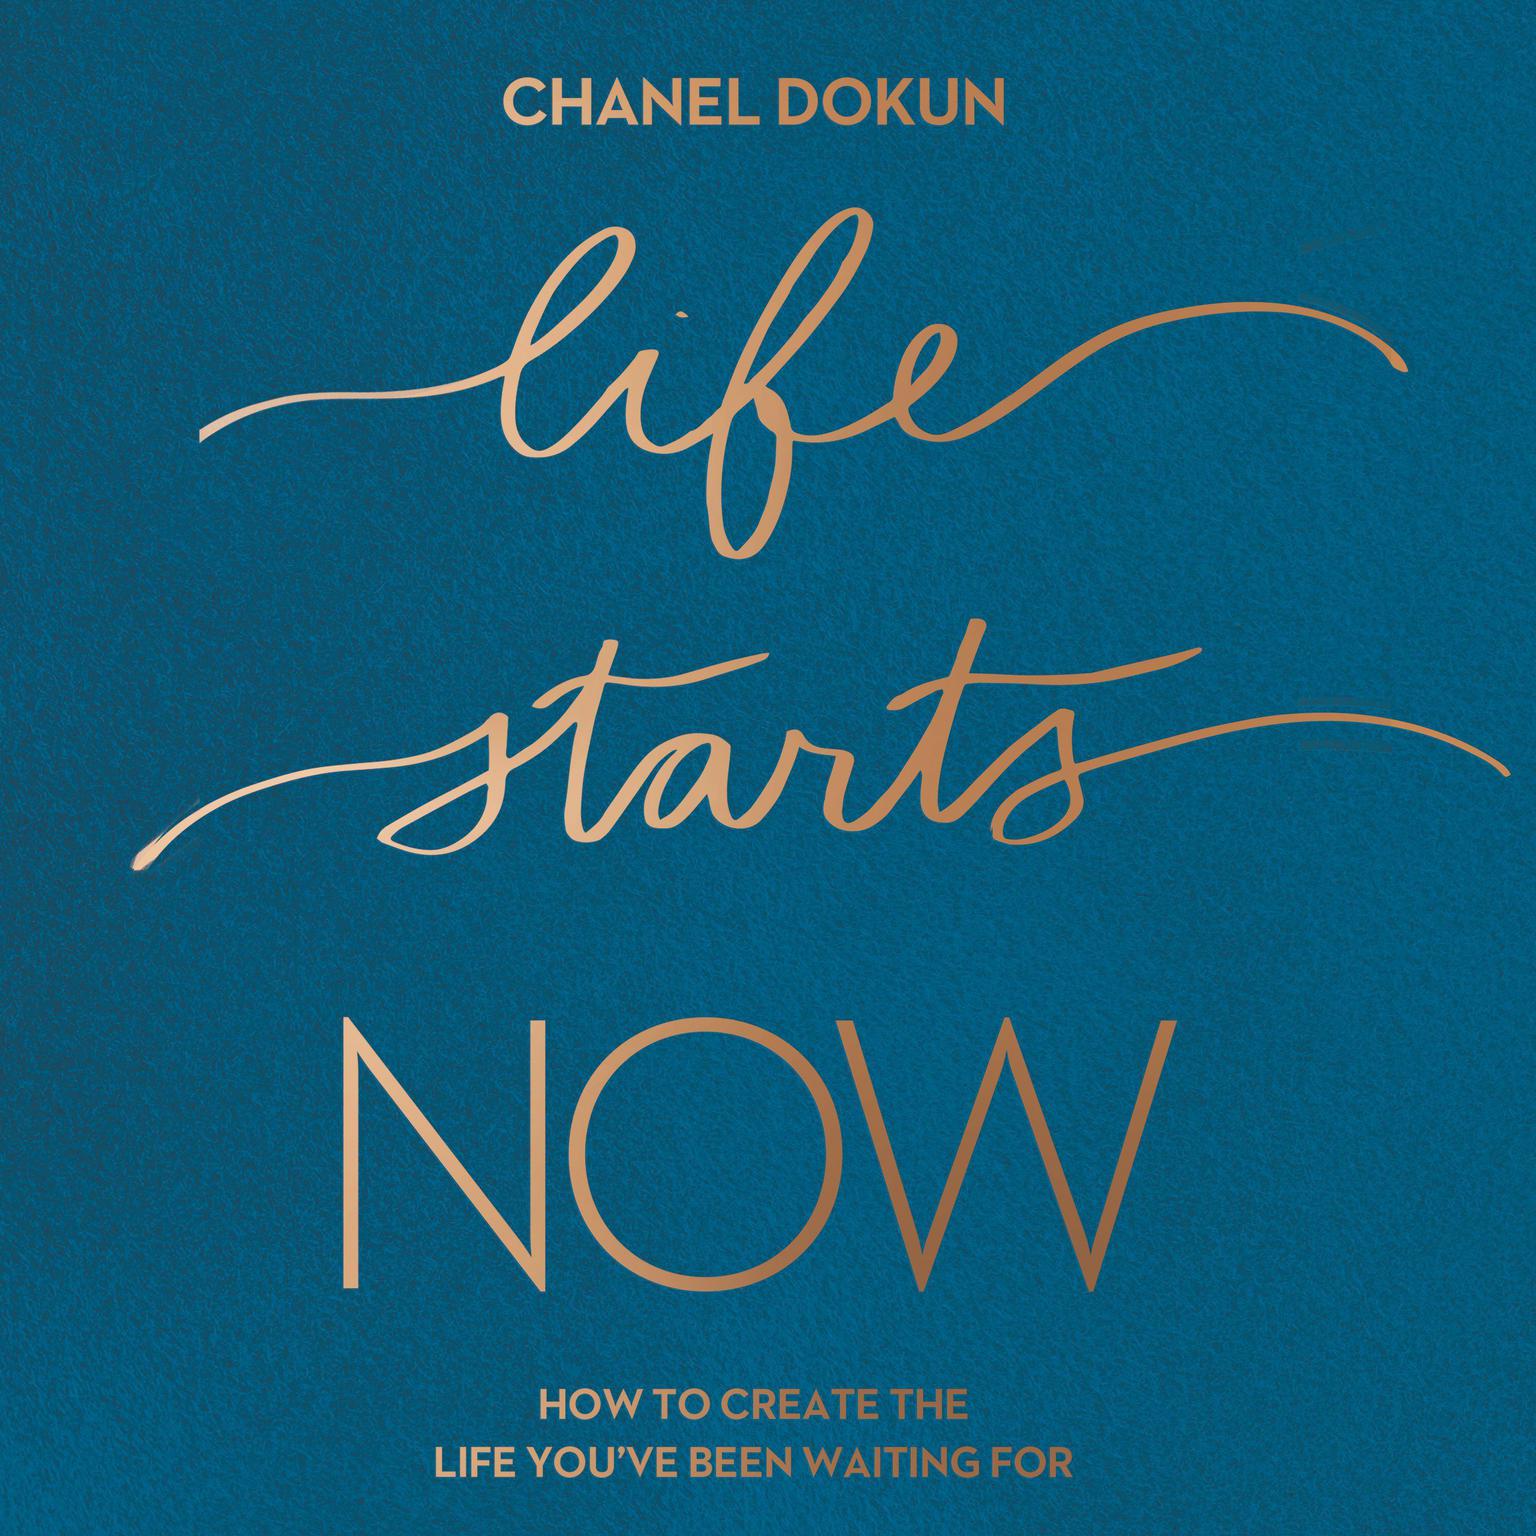 Life Starts Now: How to Create the Life You’ve Been Waiting For Audiobook, by Chanel Dokun